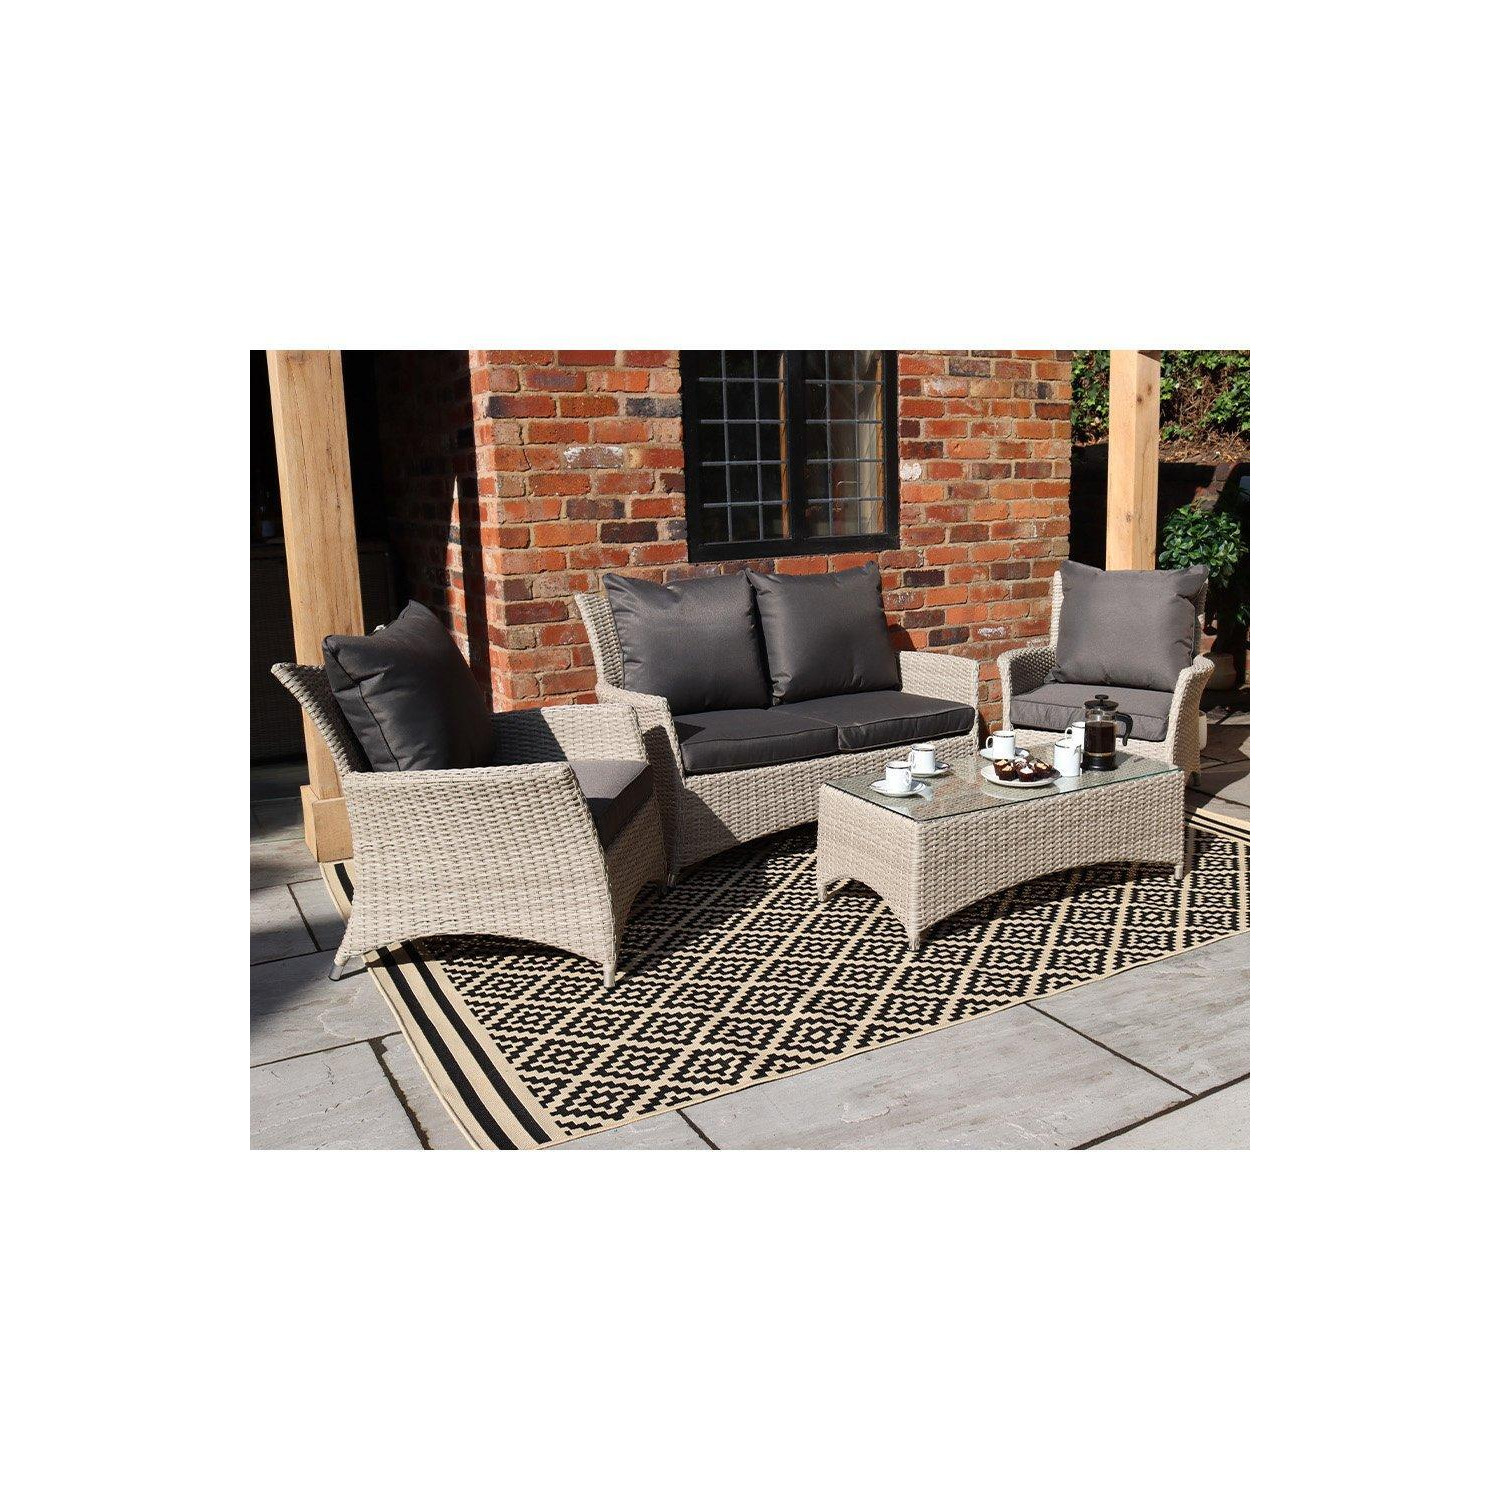 LISBON Deluxe 4 Seater 4pc Lounging Coffee Set - image 1